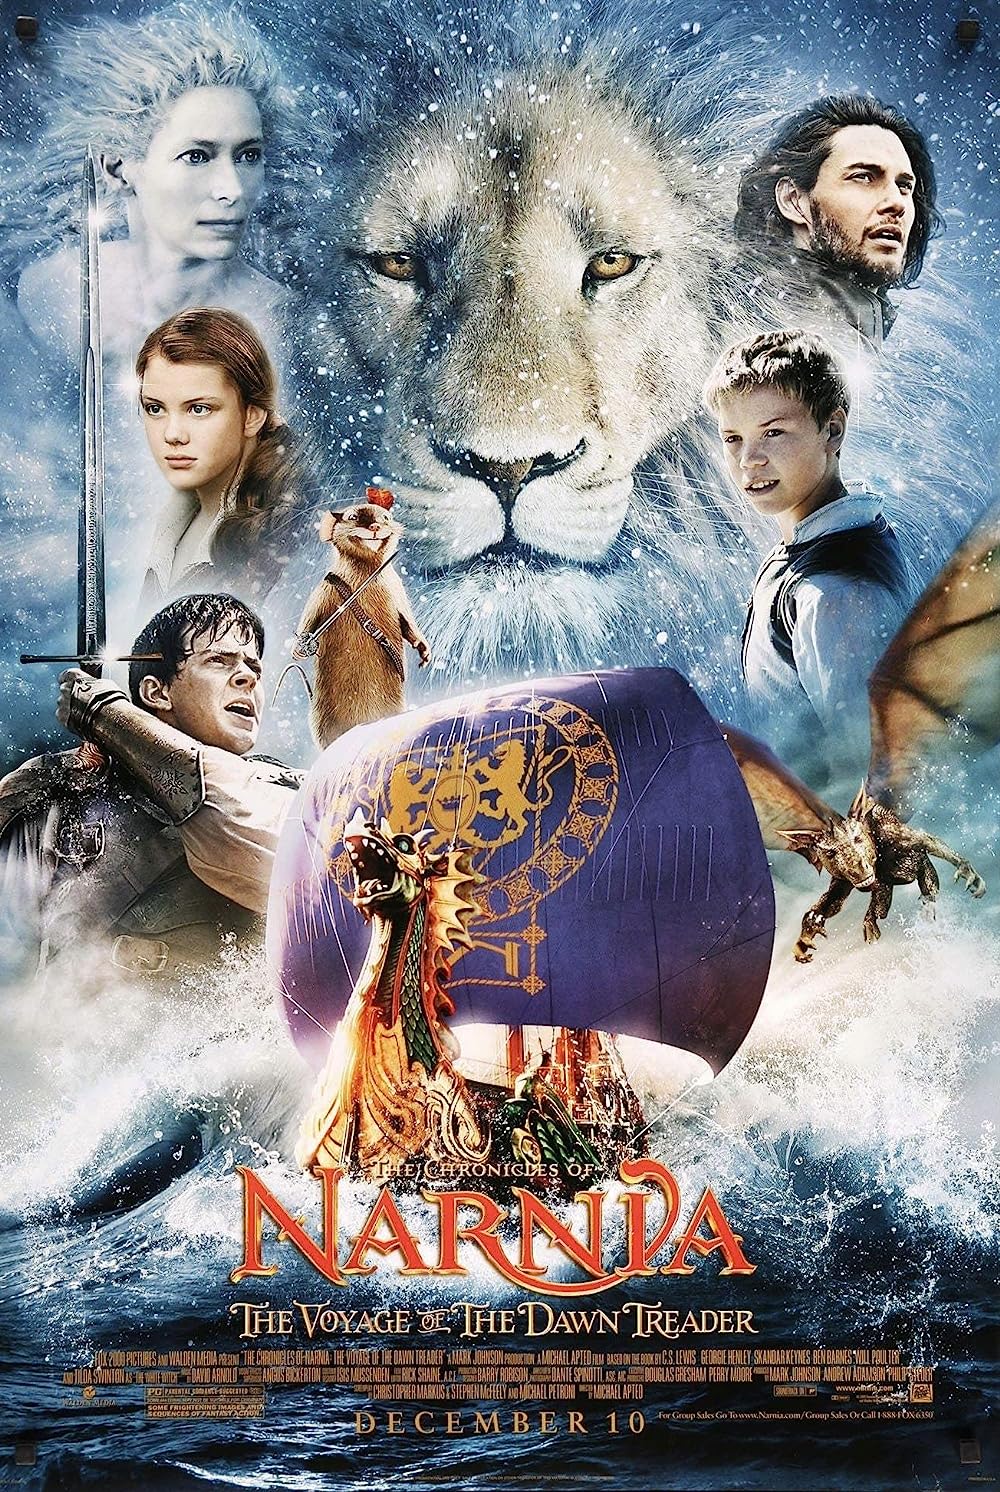 The Chronicles of Narnia The Voyage of the Dawn Treader (2010) 480p BluRay Hindi ORG Dual Audio Movie ESubs [400MB]